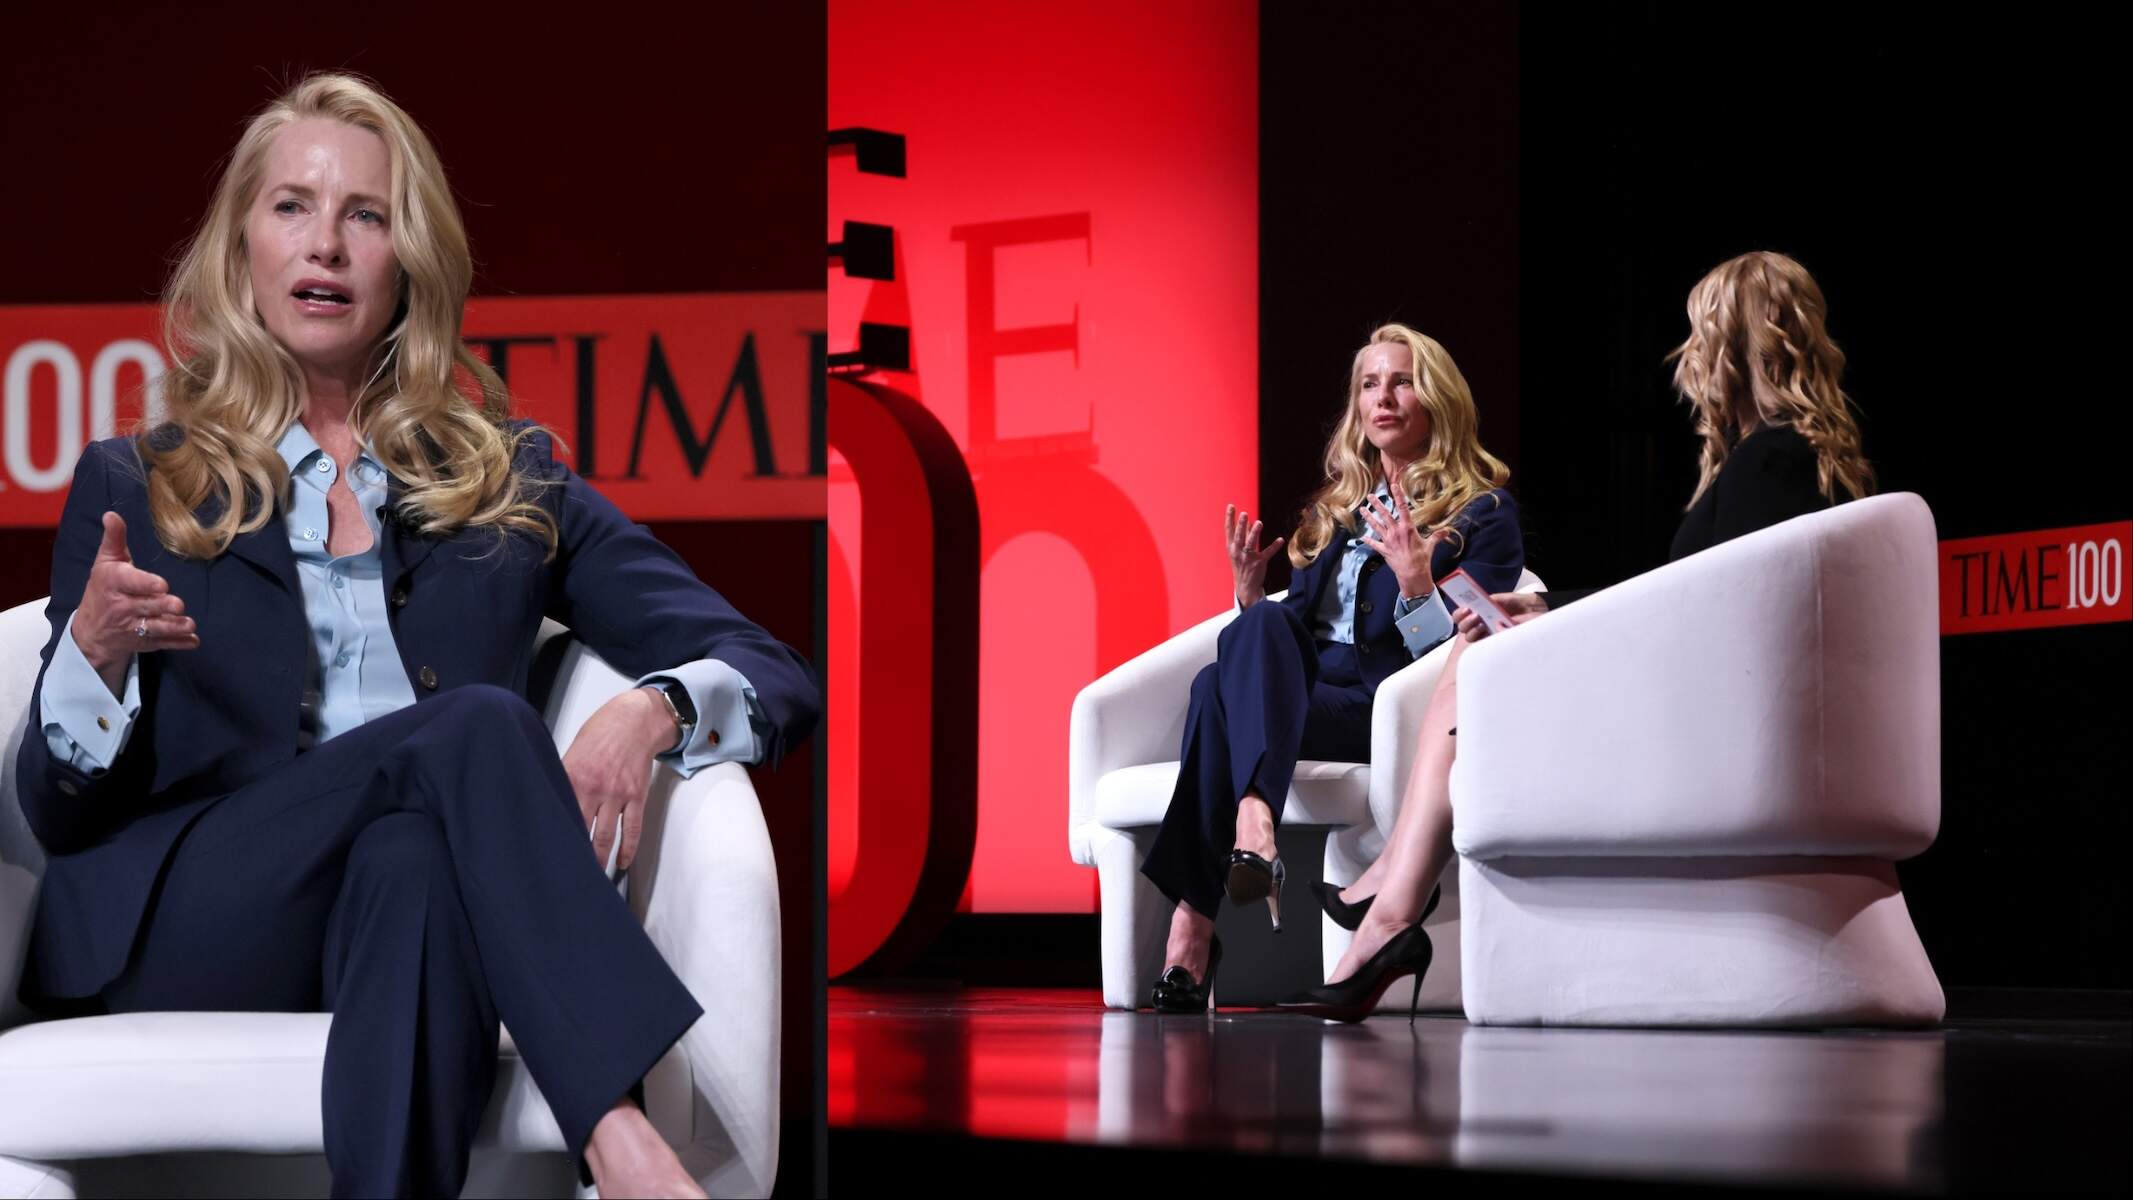 Wearing a navy suit, Laurene Powell Jobs speaks with Jess Sibley onstage at the 2023 TIME100 Summit